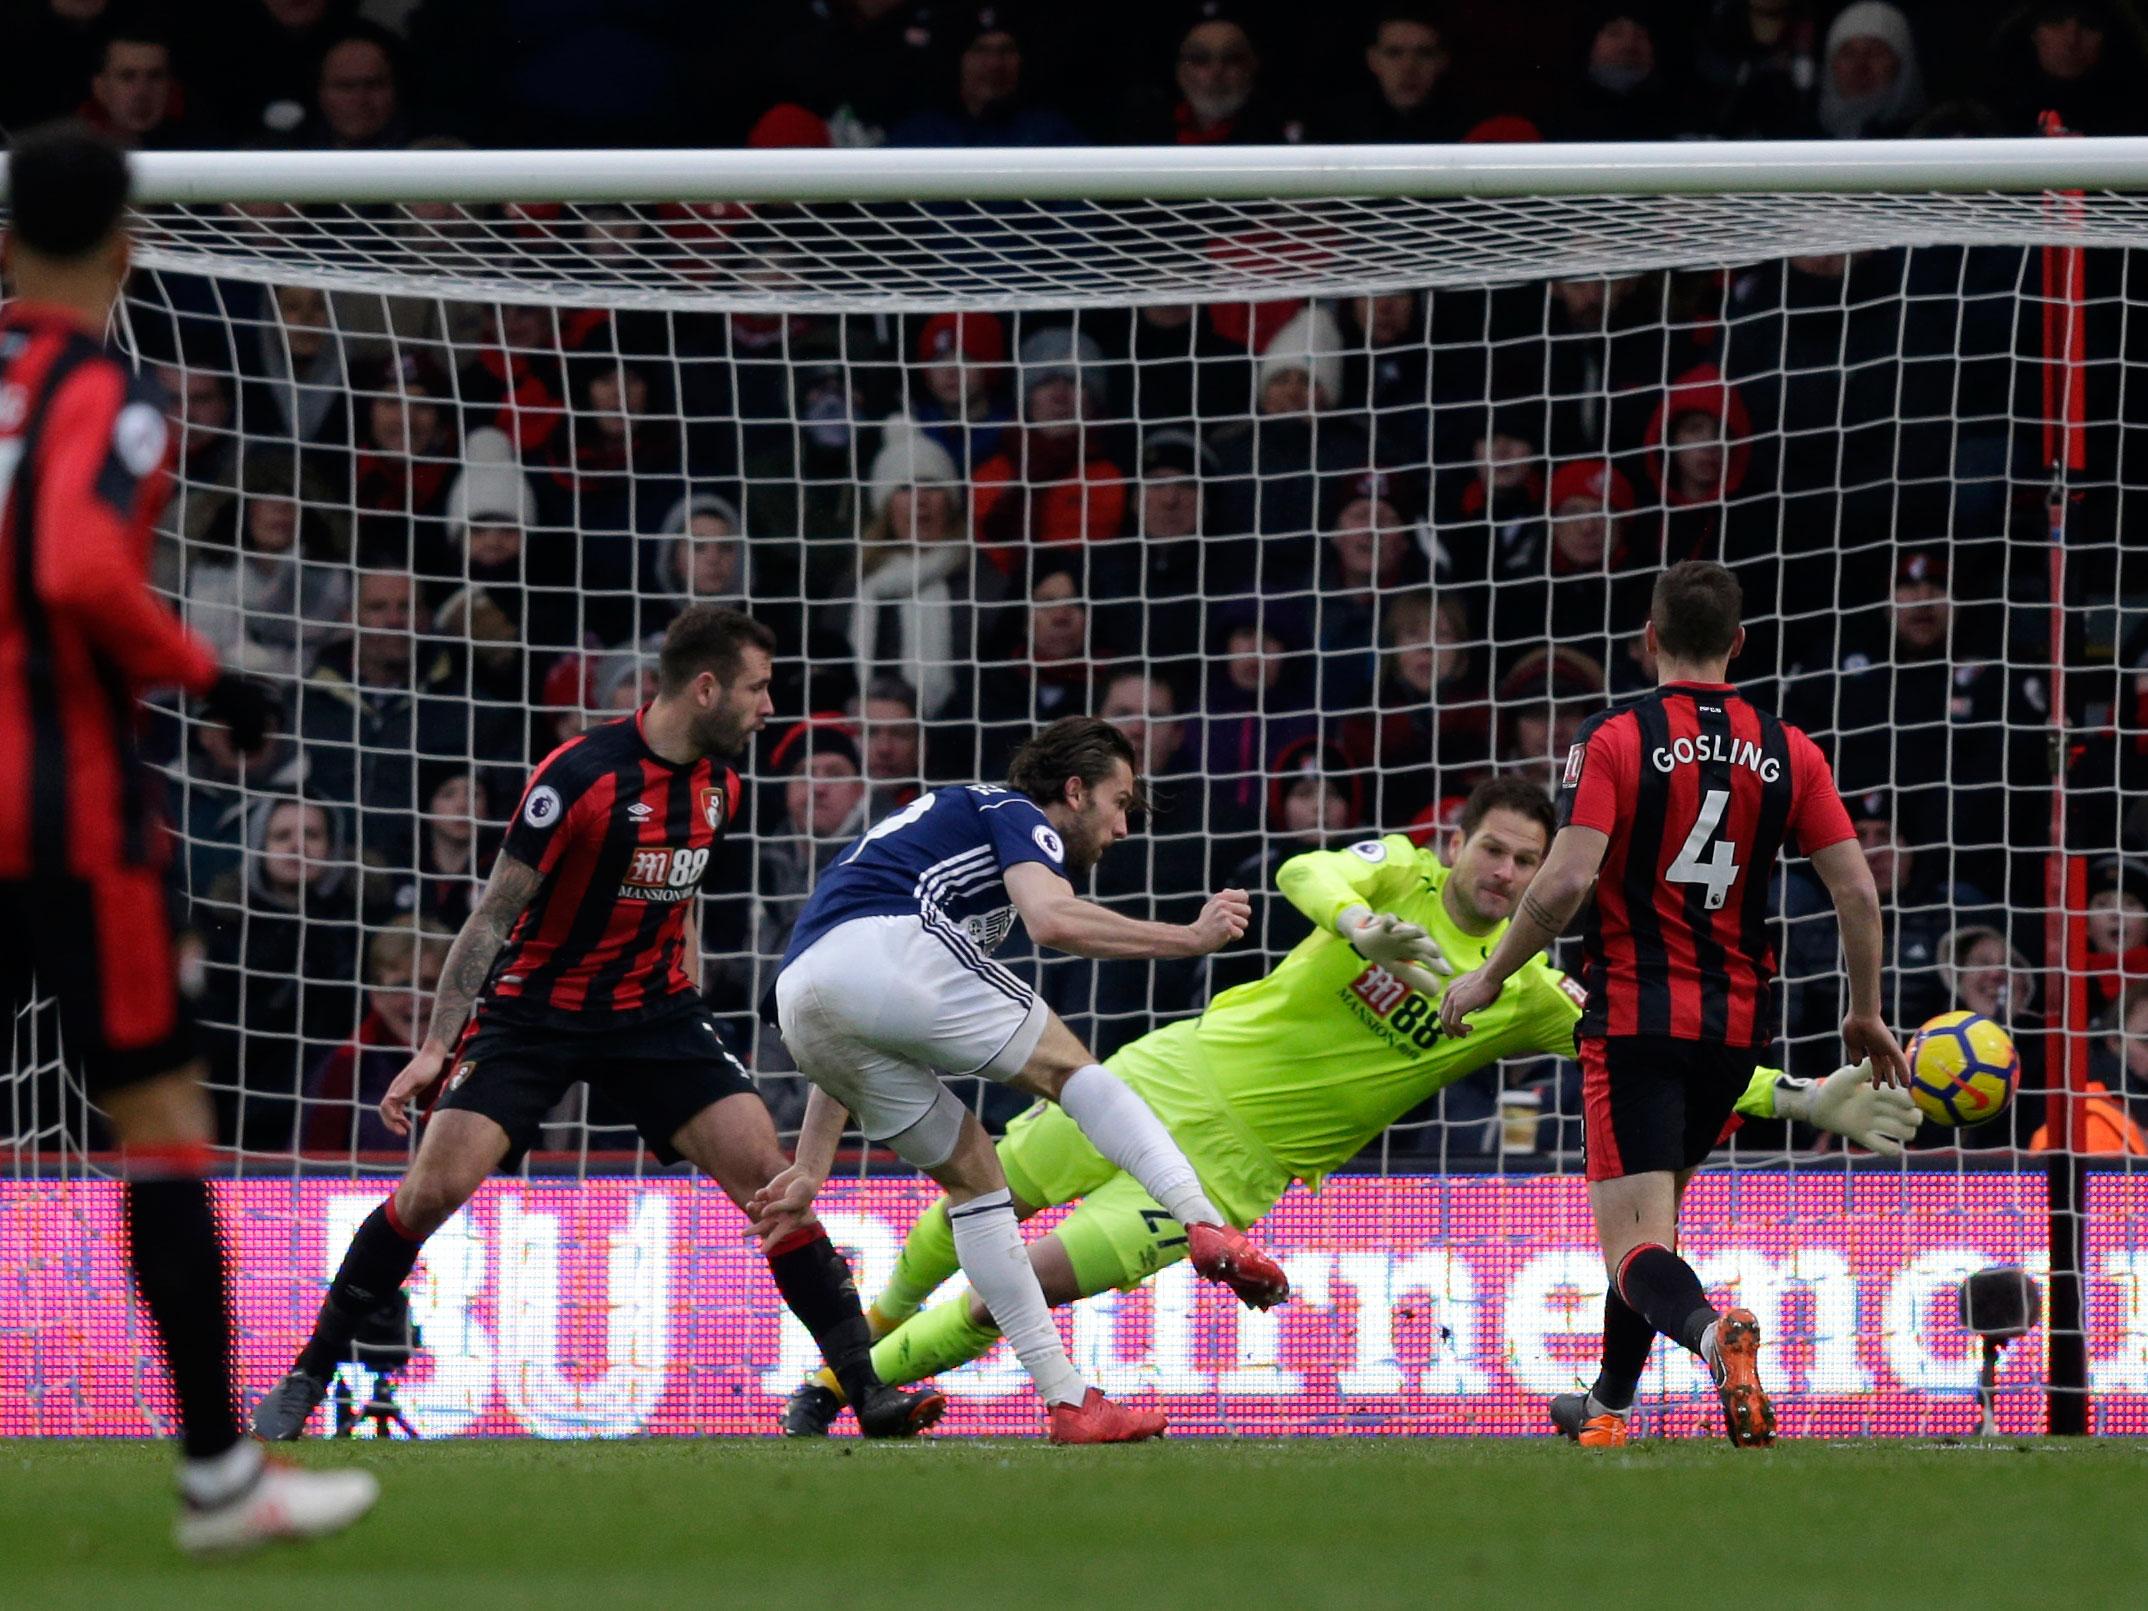 &#13;
Jay Rodriguez had put the Baggies ahead before another late collapse &#13;